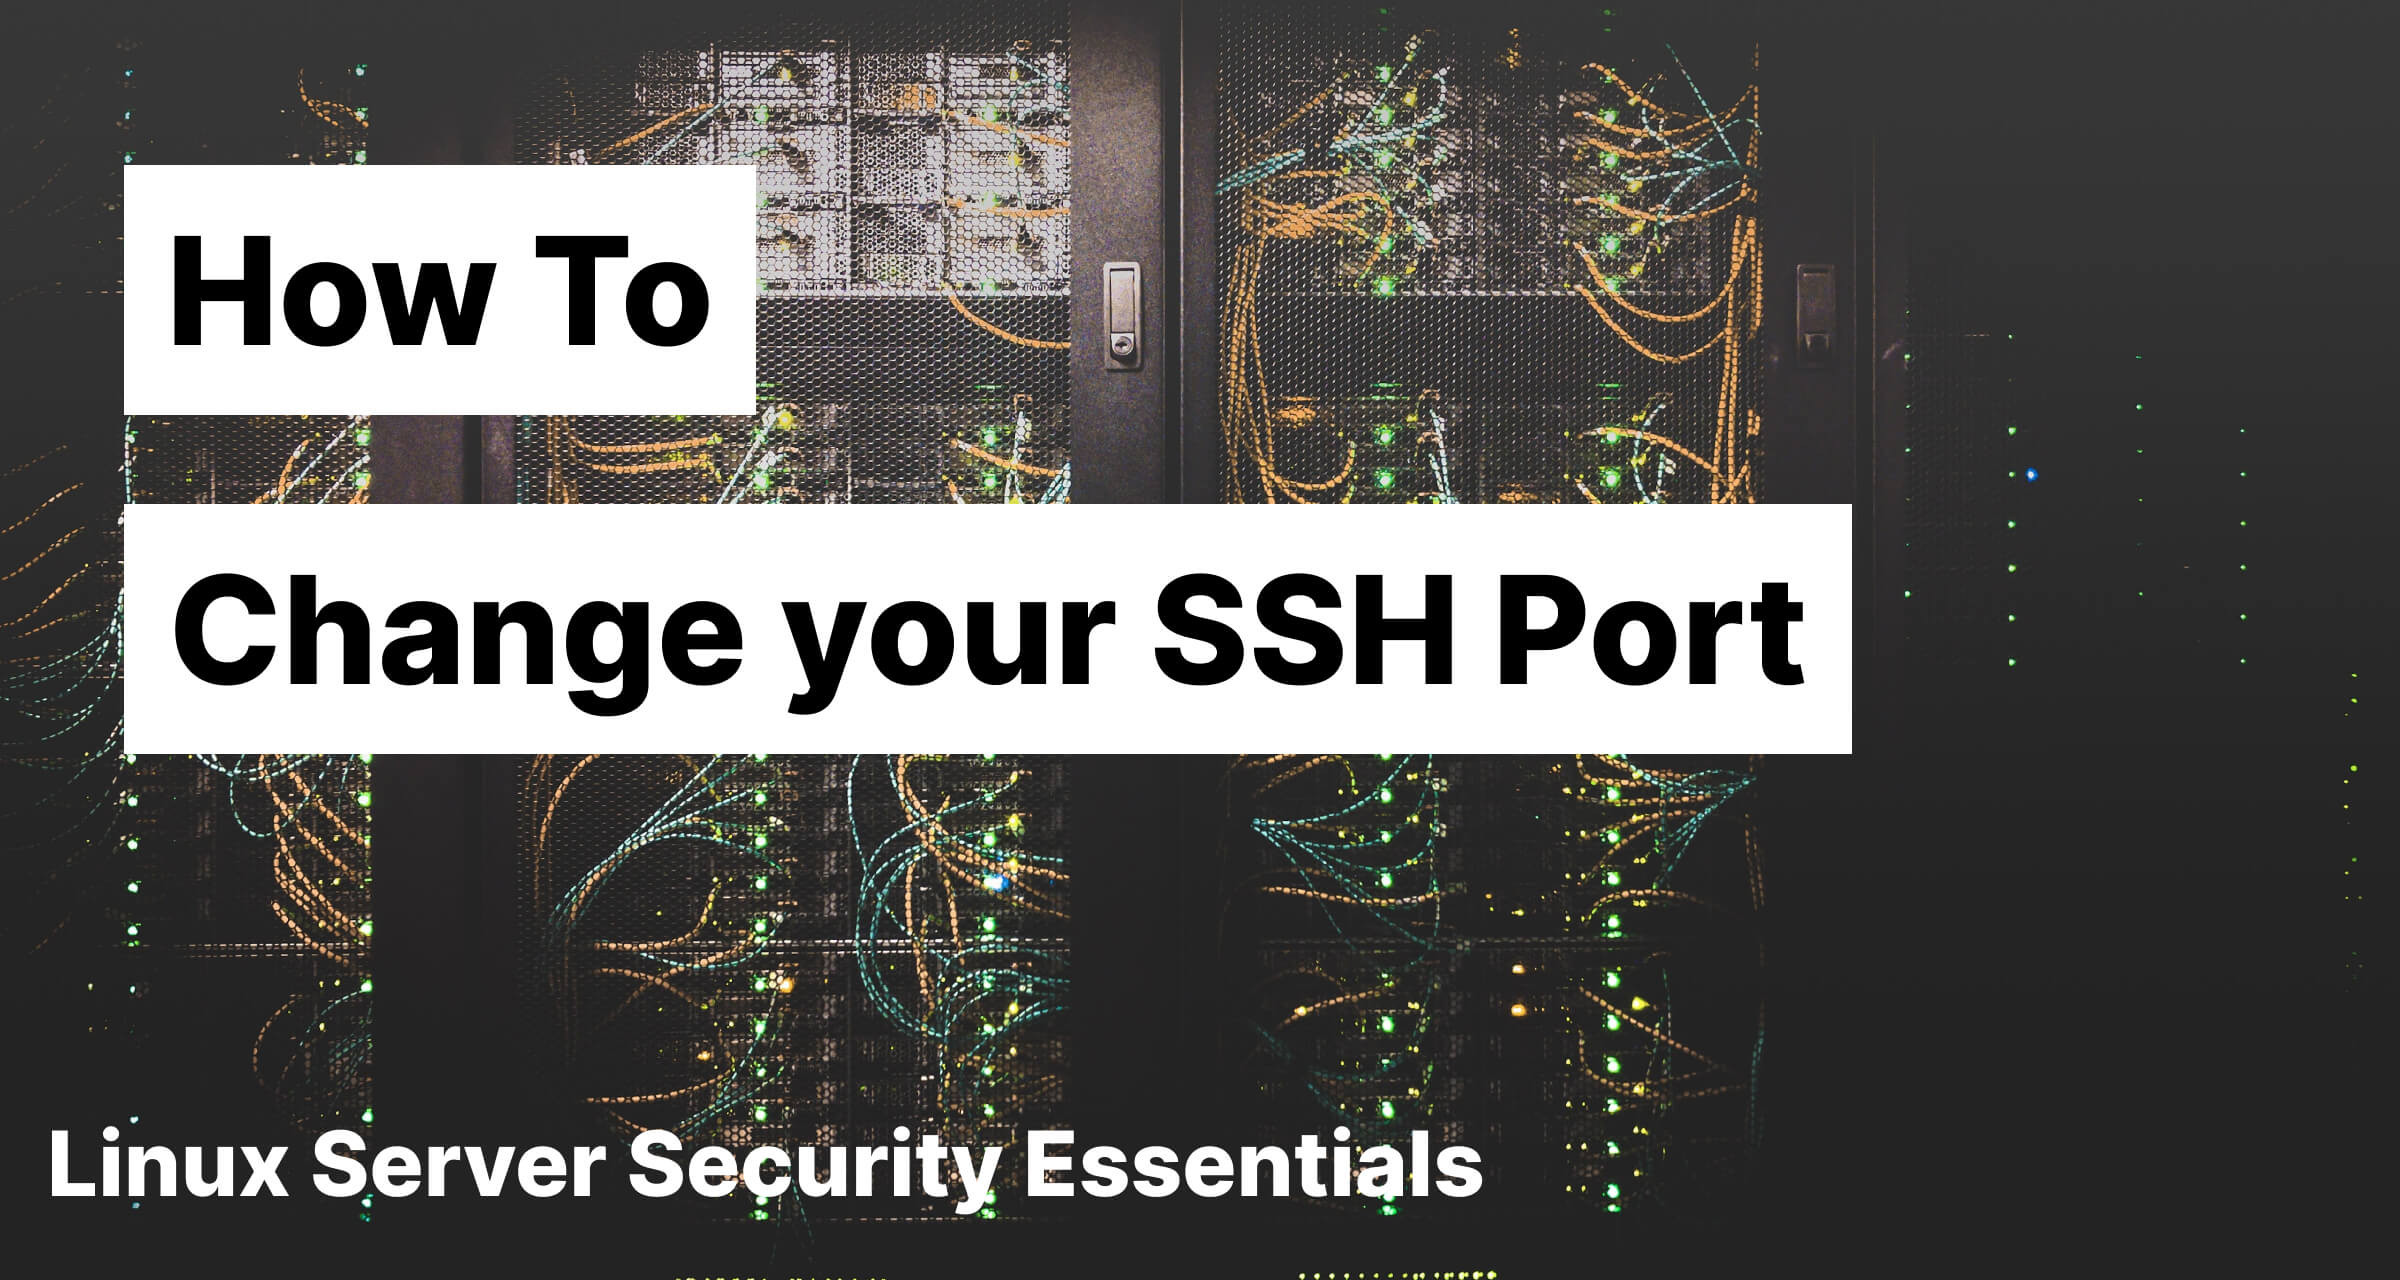 How to change your SSH port on Linux